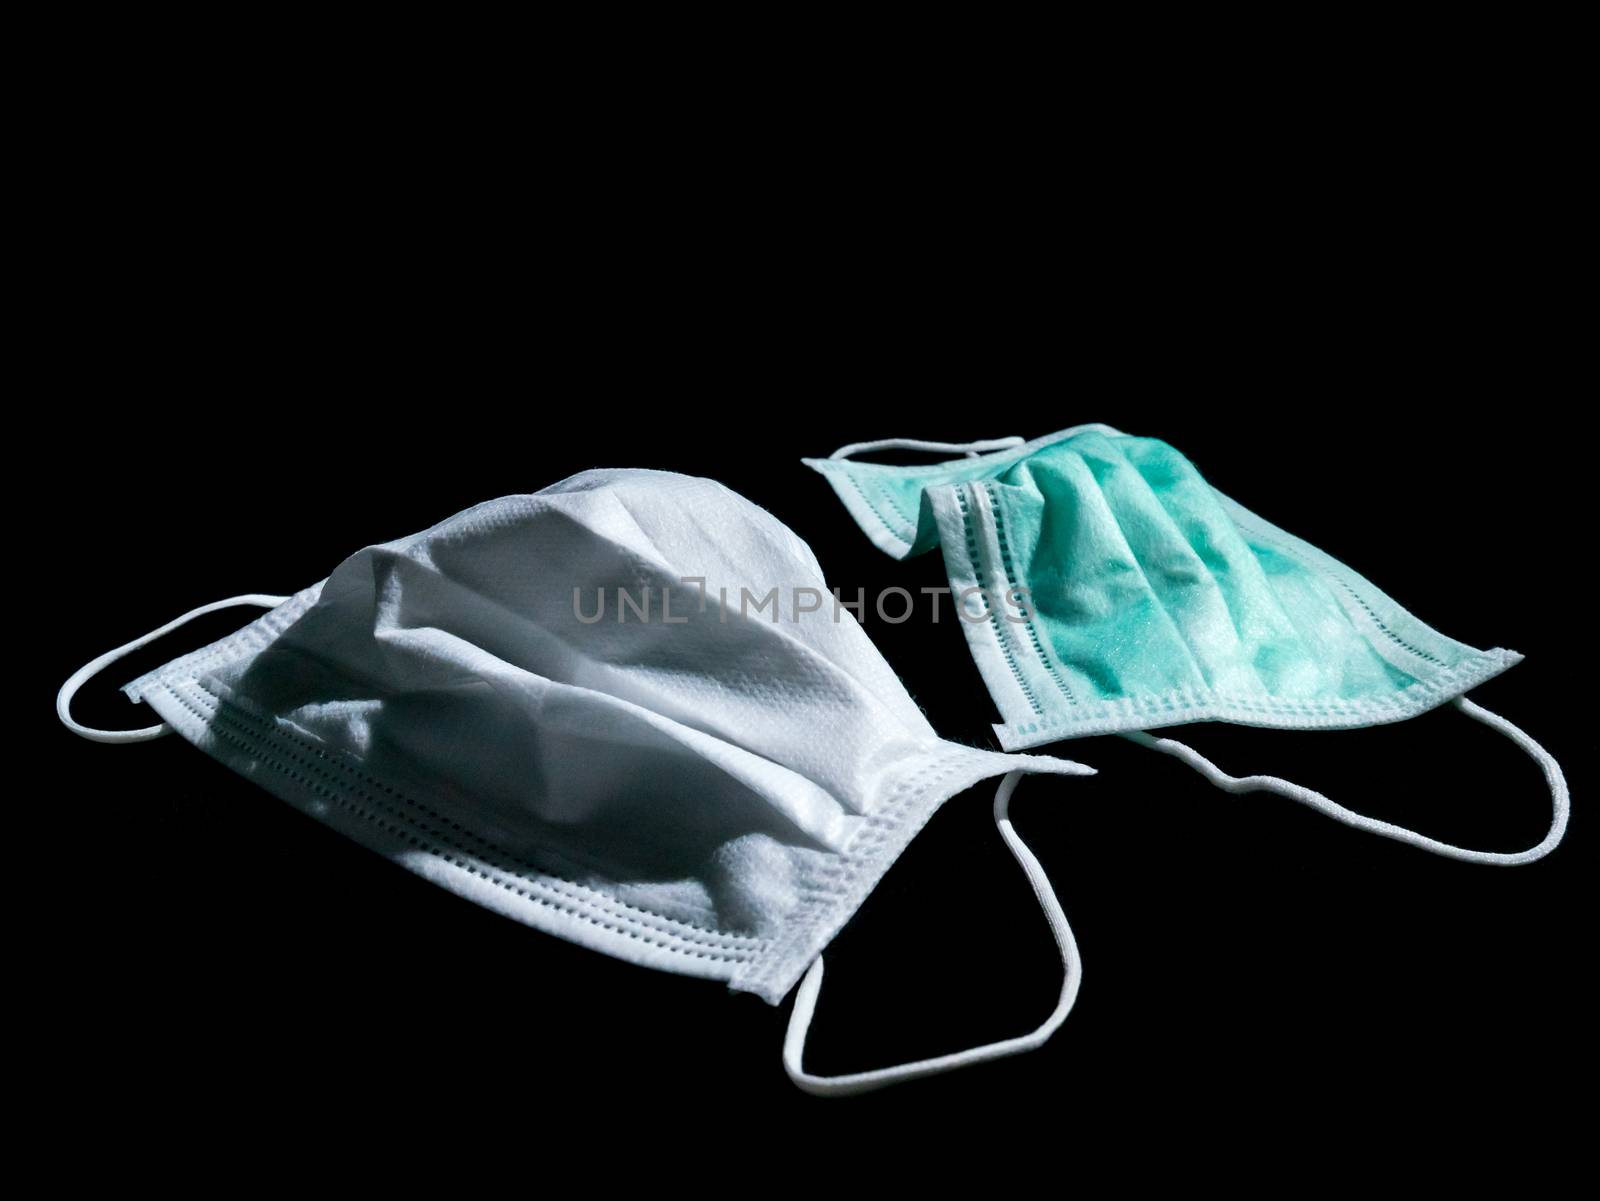 Used white and green surgical mask place on black background, Dark tone.